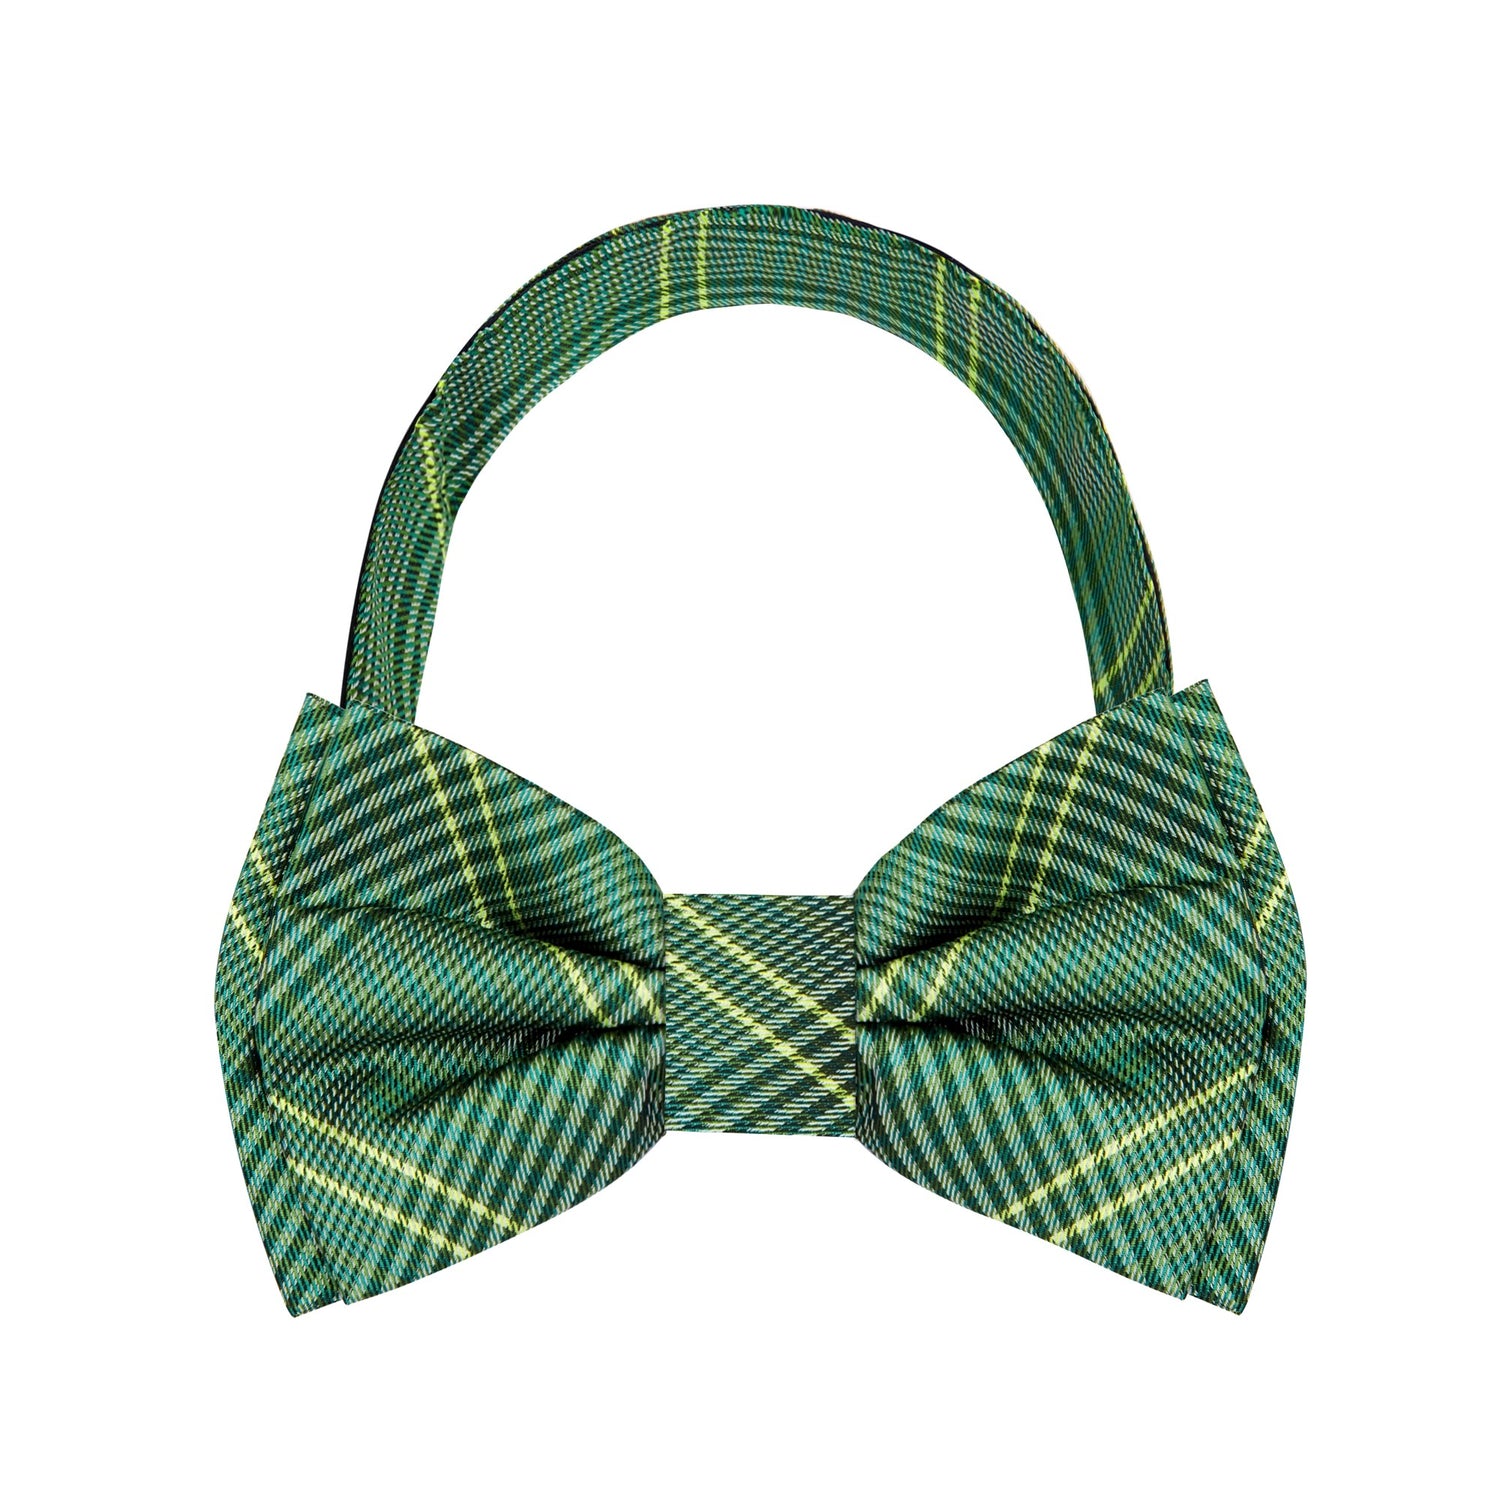 Pre-Tied: Green, Yellow Plaid Bow Tie